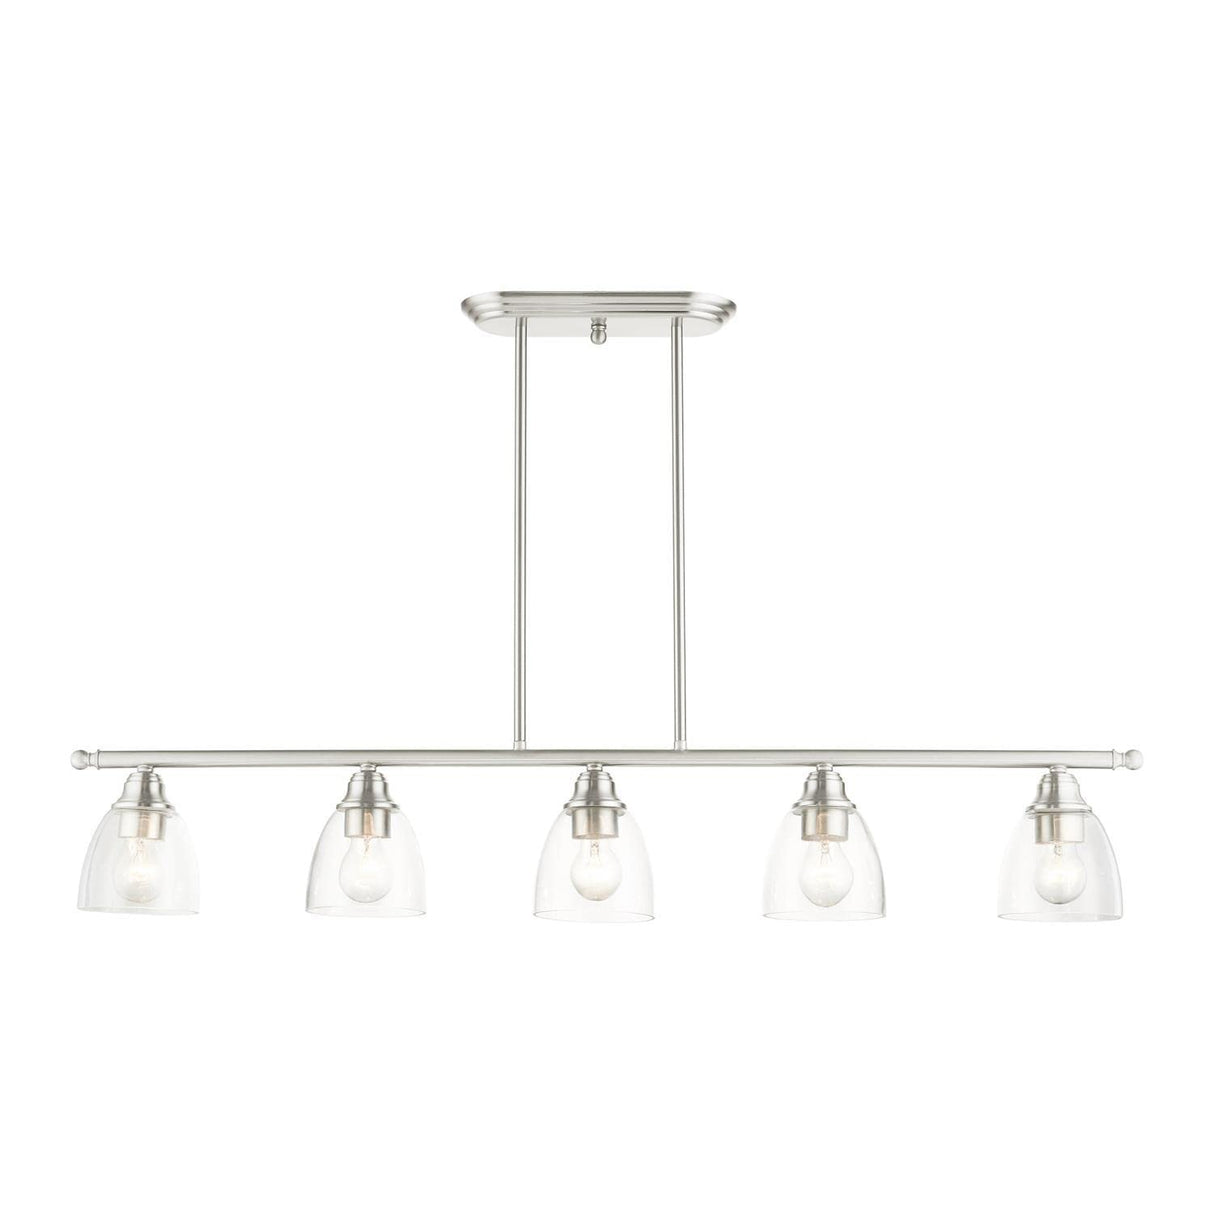 Montgomery Collection N/A Light Brushed Nickel Linear Chandelier (46338-91)